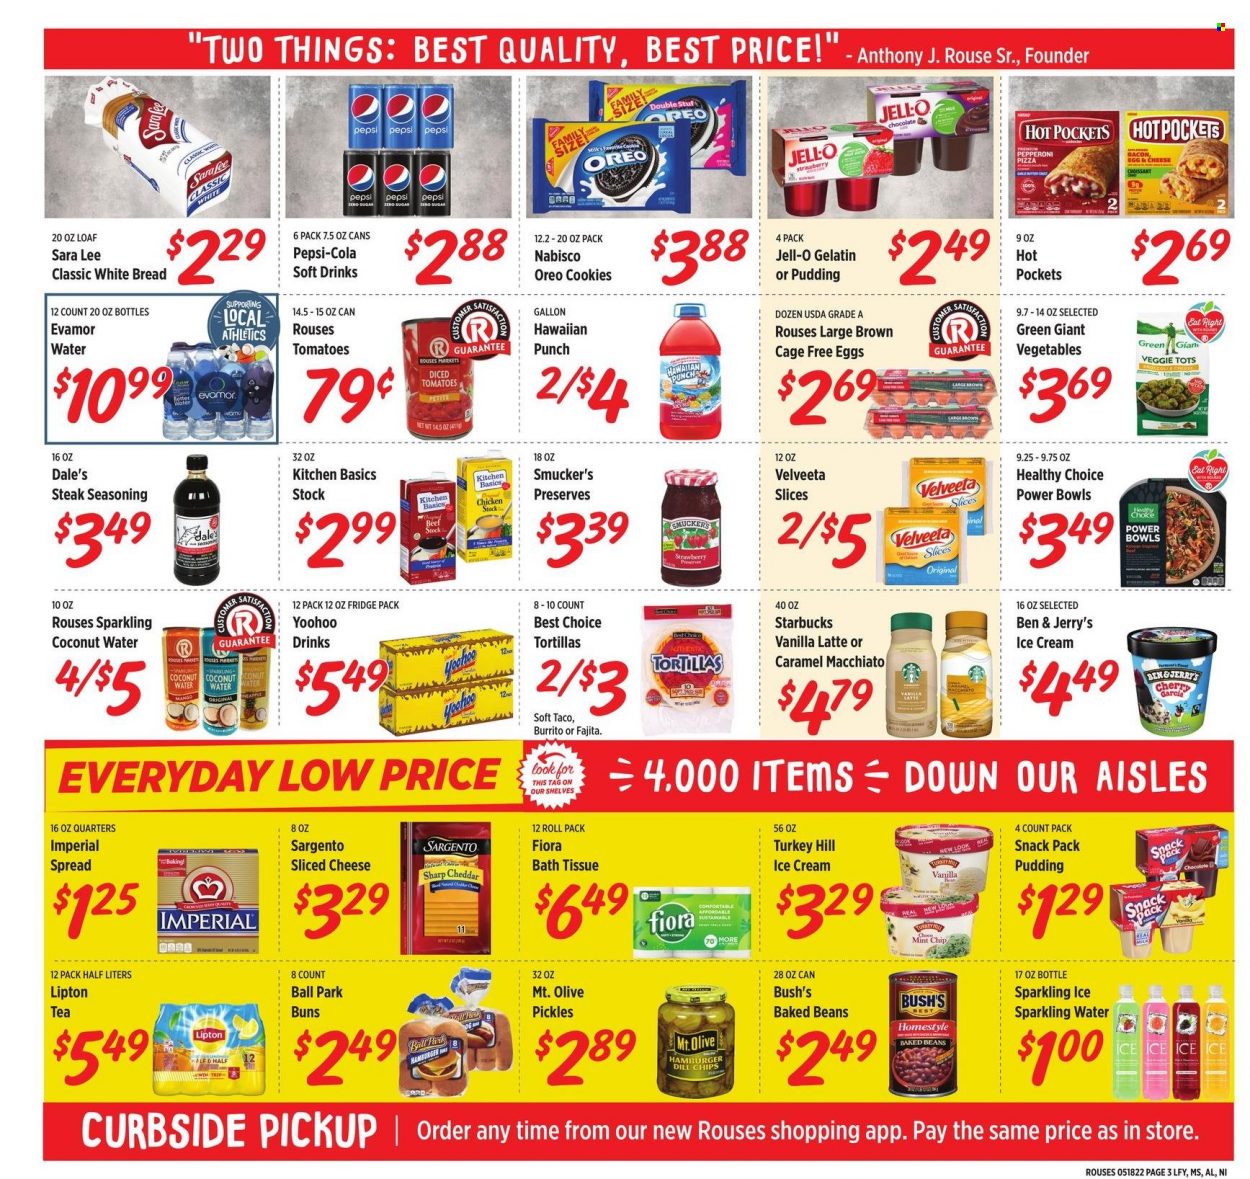 thumbnail - Rouses Markets Flyer - 05/18/2022 - 05/25/2022 - Sales products - bread, tortillas, white bread, croissant, buns, Sara Lee, beans, pizza, hamburger, fajita, burrito, Healthy Choice, bacon, pepperoni, sliced cheese, Sargento, pudding, Oreo, eggs, cage free eggs, ice cream, Ben & Jerry's, cookies, chips, Jell-O, pickles, baked beans, diced tomatoes, dill, spice, caramel, Pepsi, Lipton, coconut water, soft drink, sparkling water, tea, Starbucks, punch, steak, bath tissue, gelatin. Page 3.